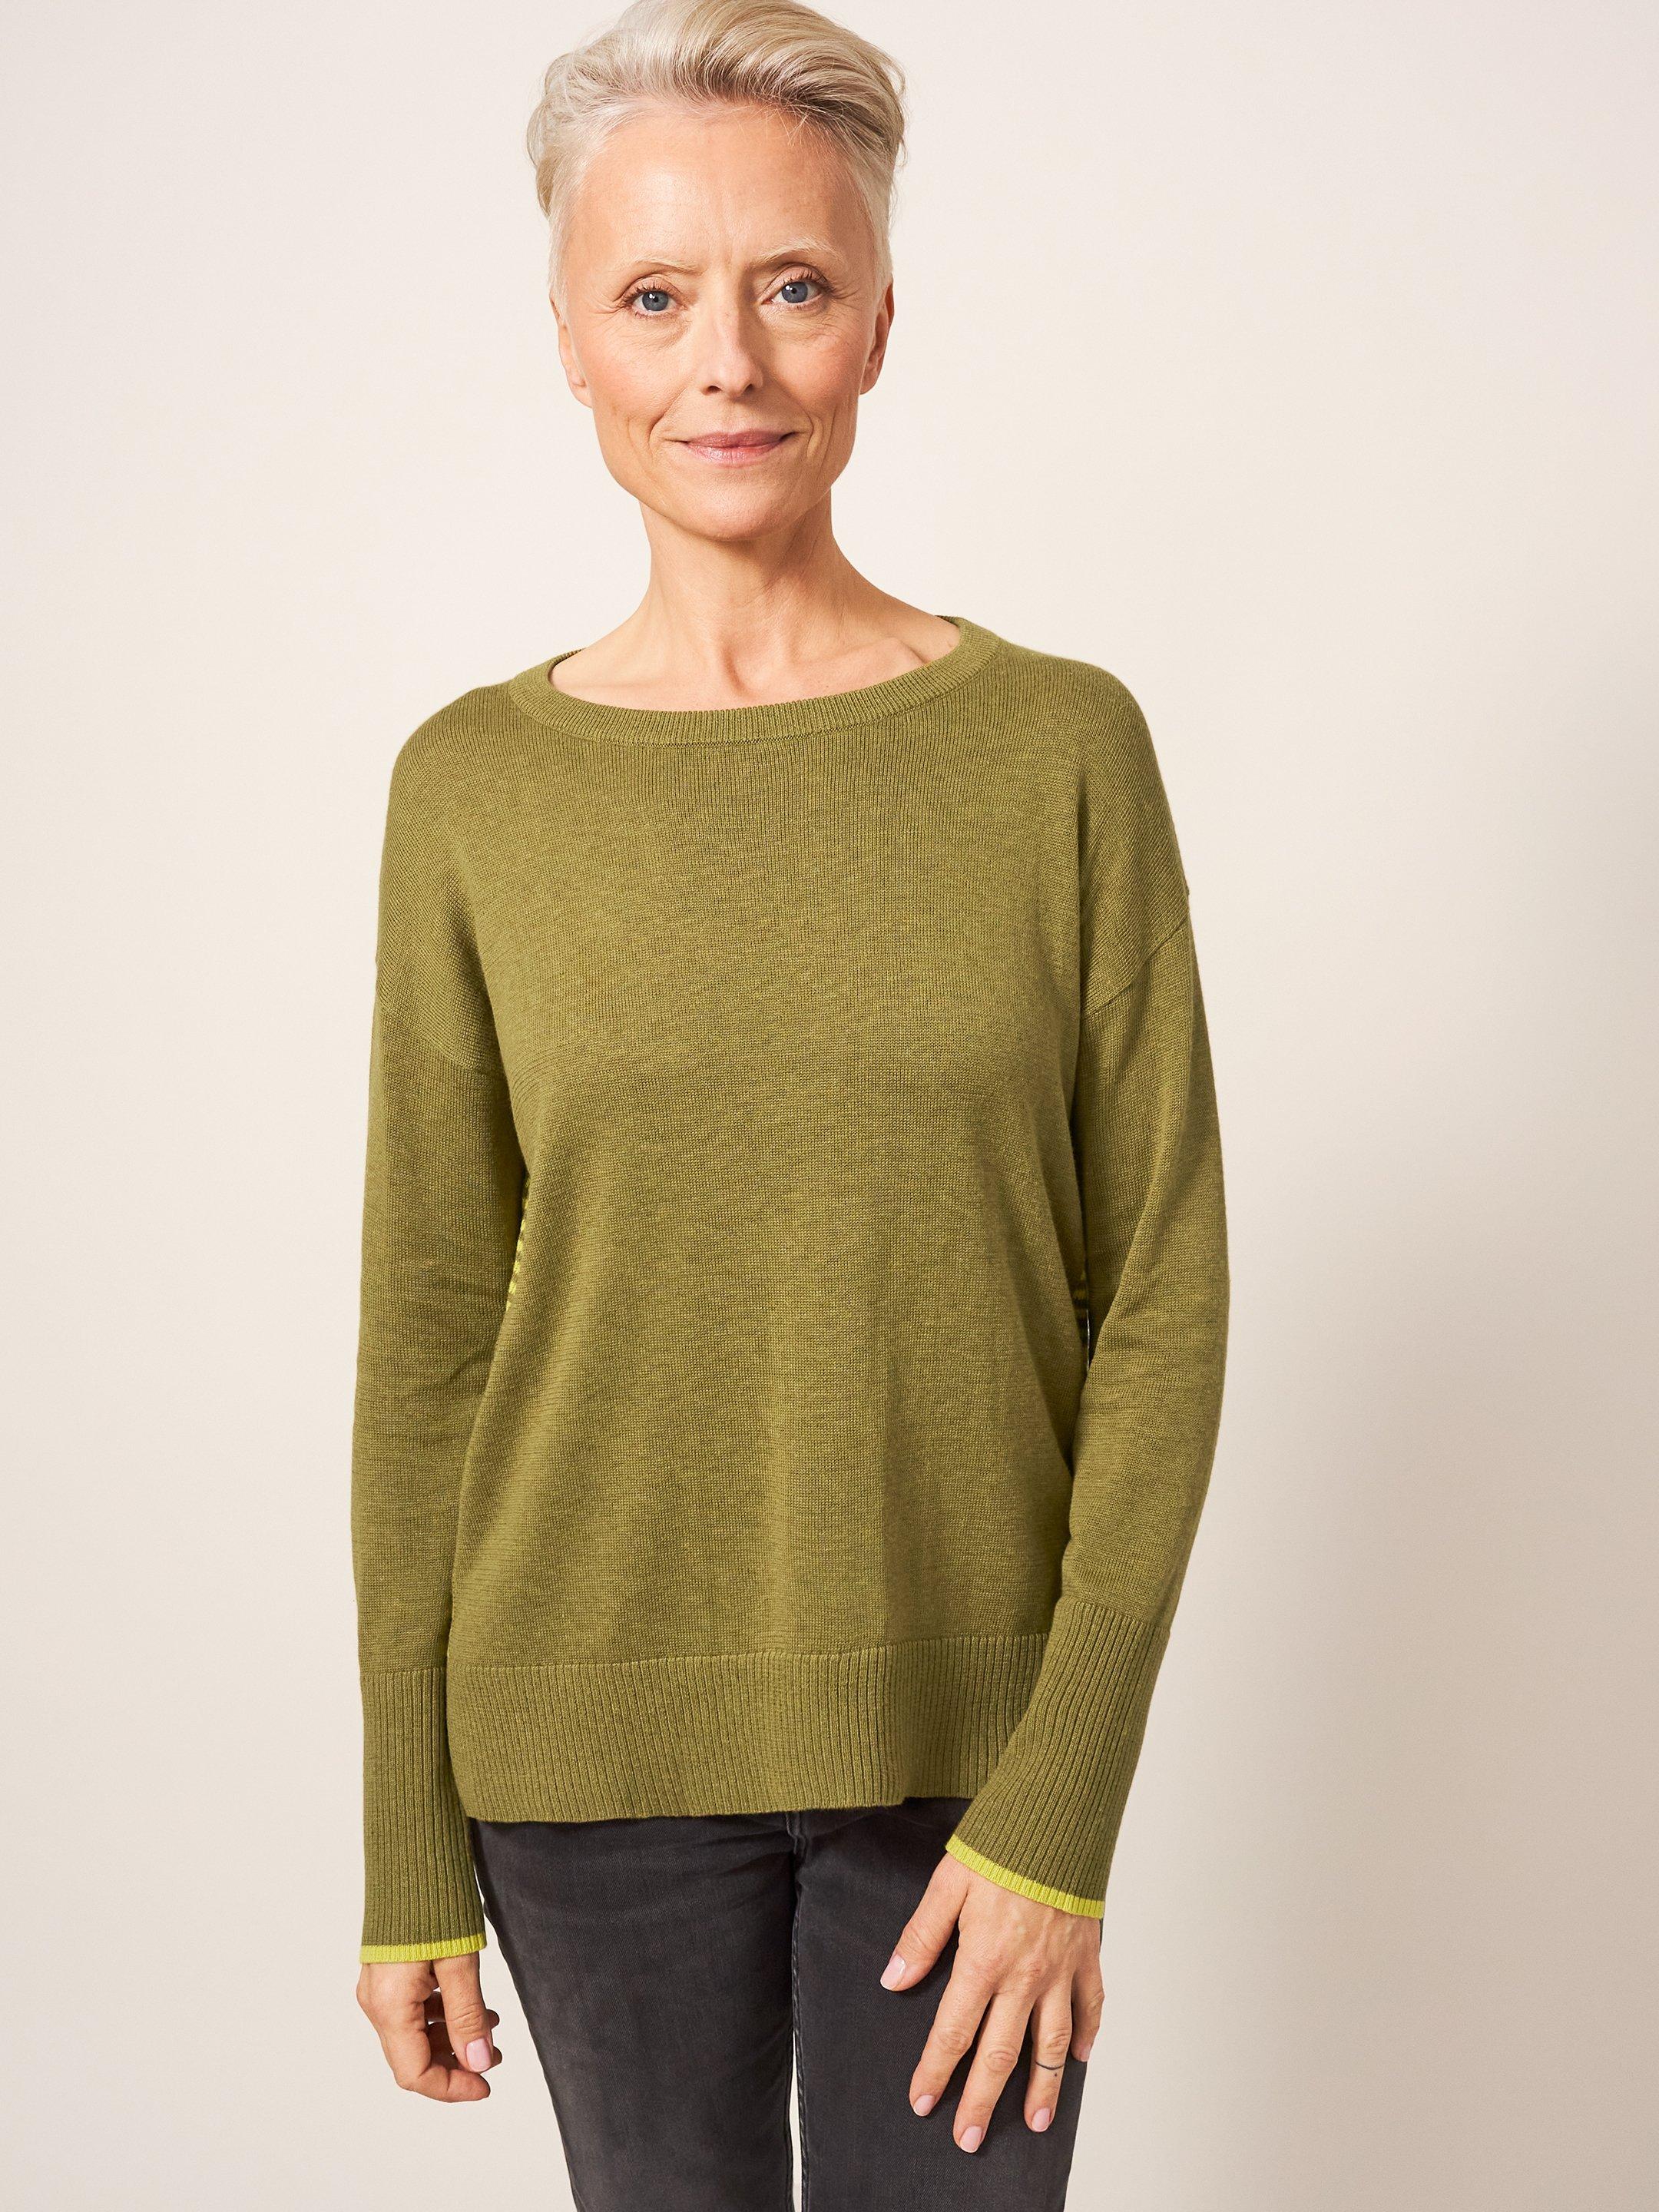 Olive Crew Neck Jumper in DEEP GRN - MIXED